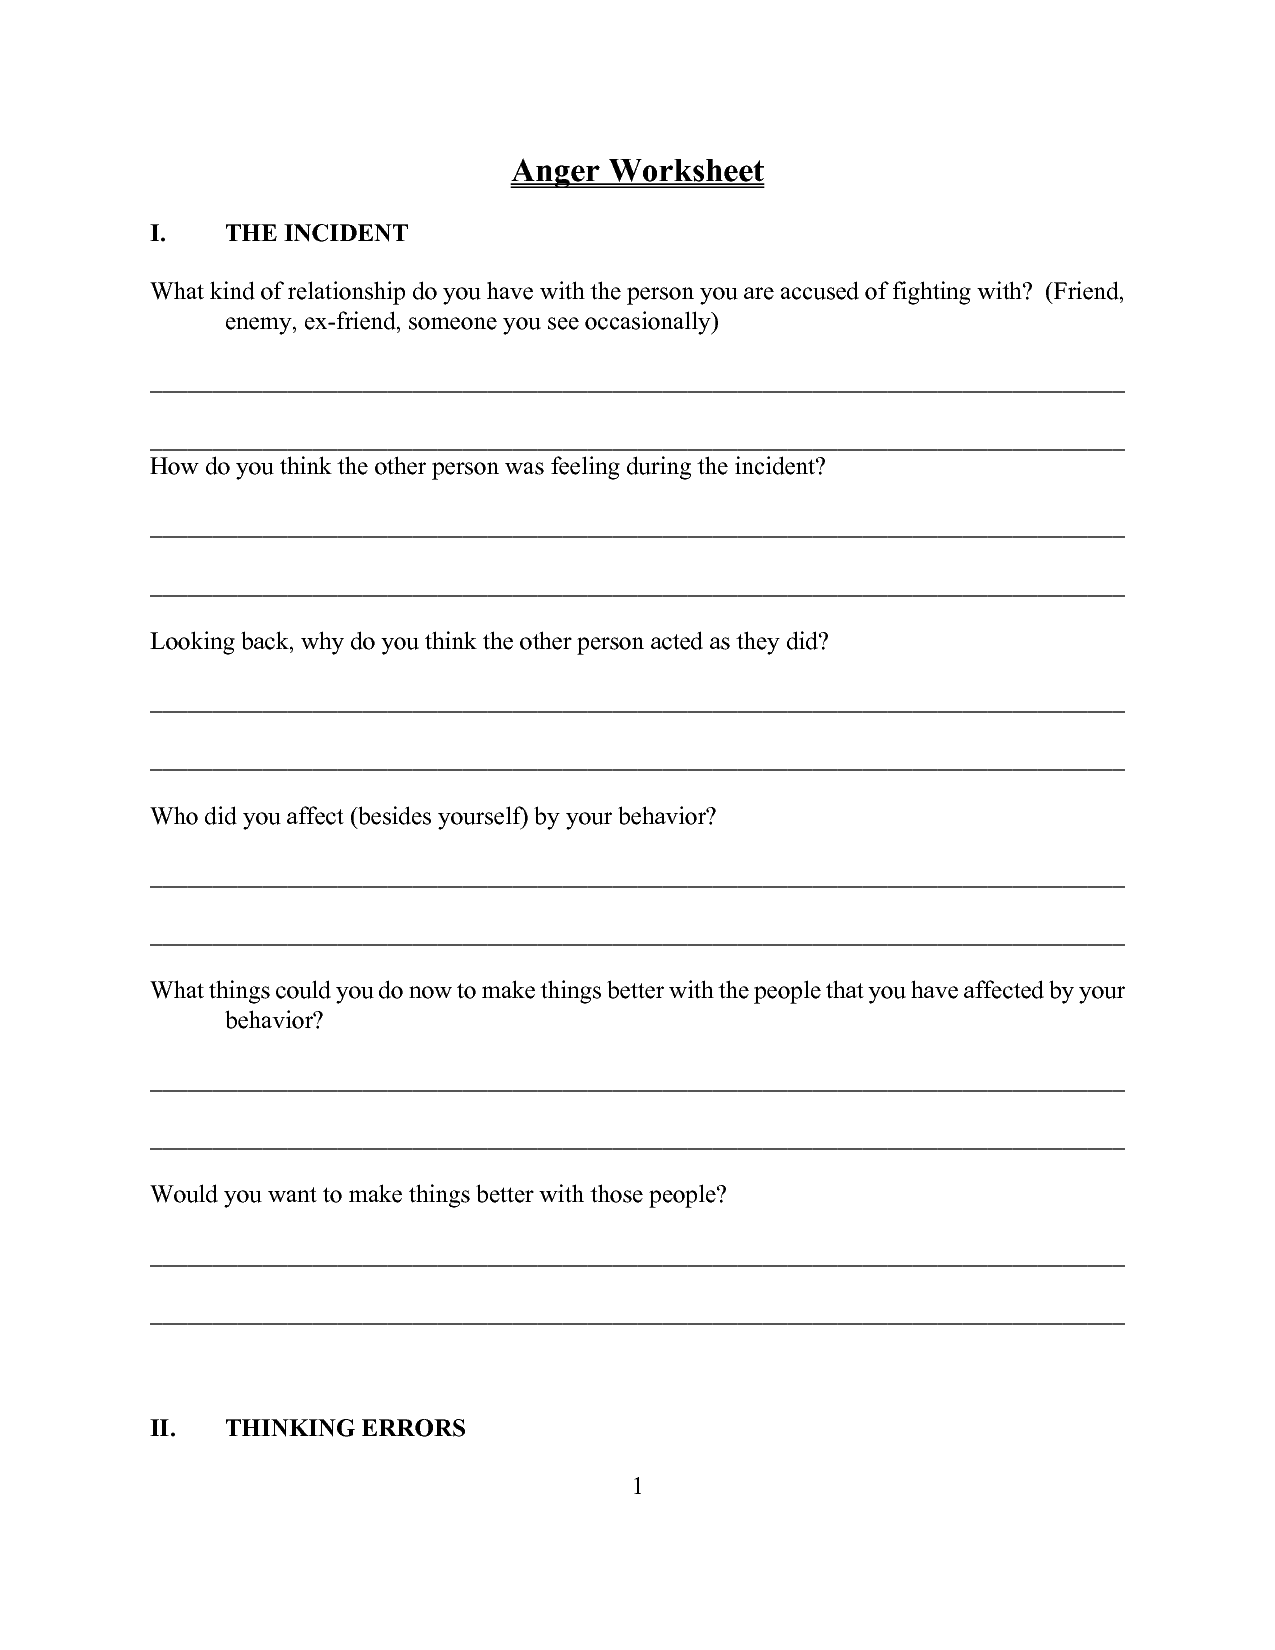 therapy-anger-anger-worksheets-therapy-worksheets-anger